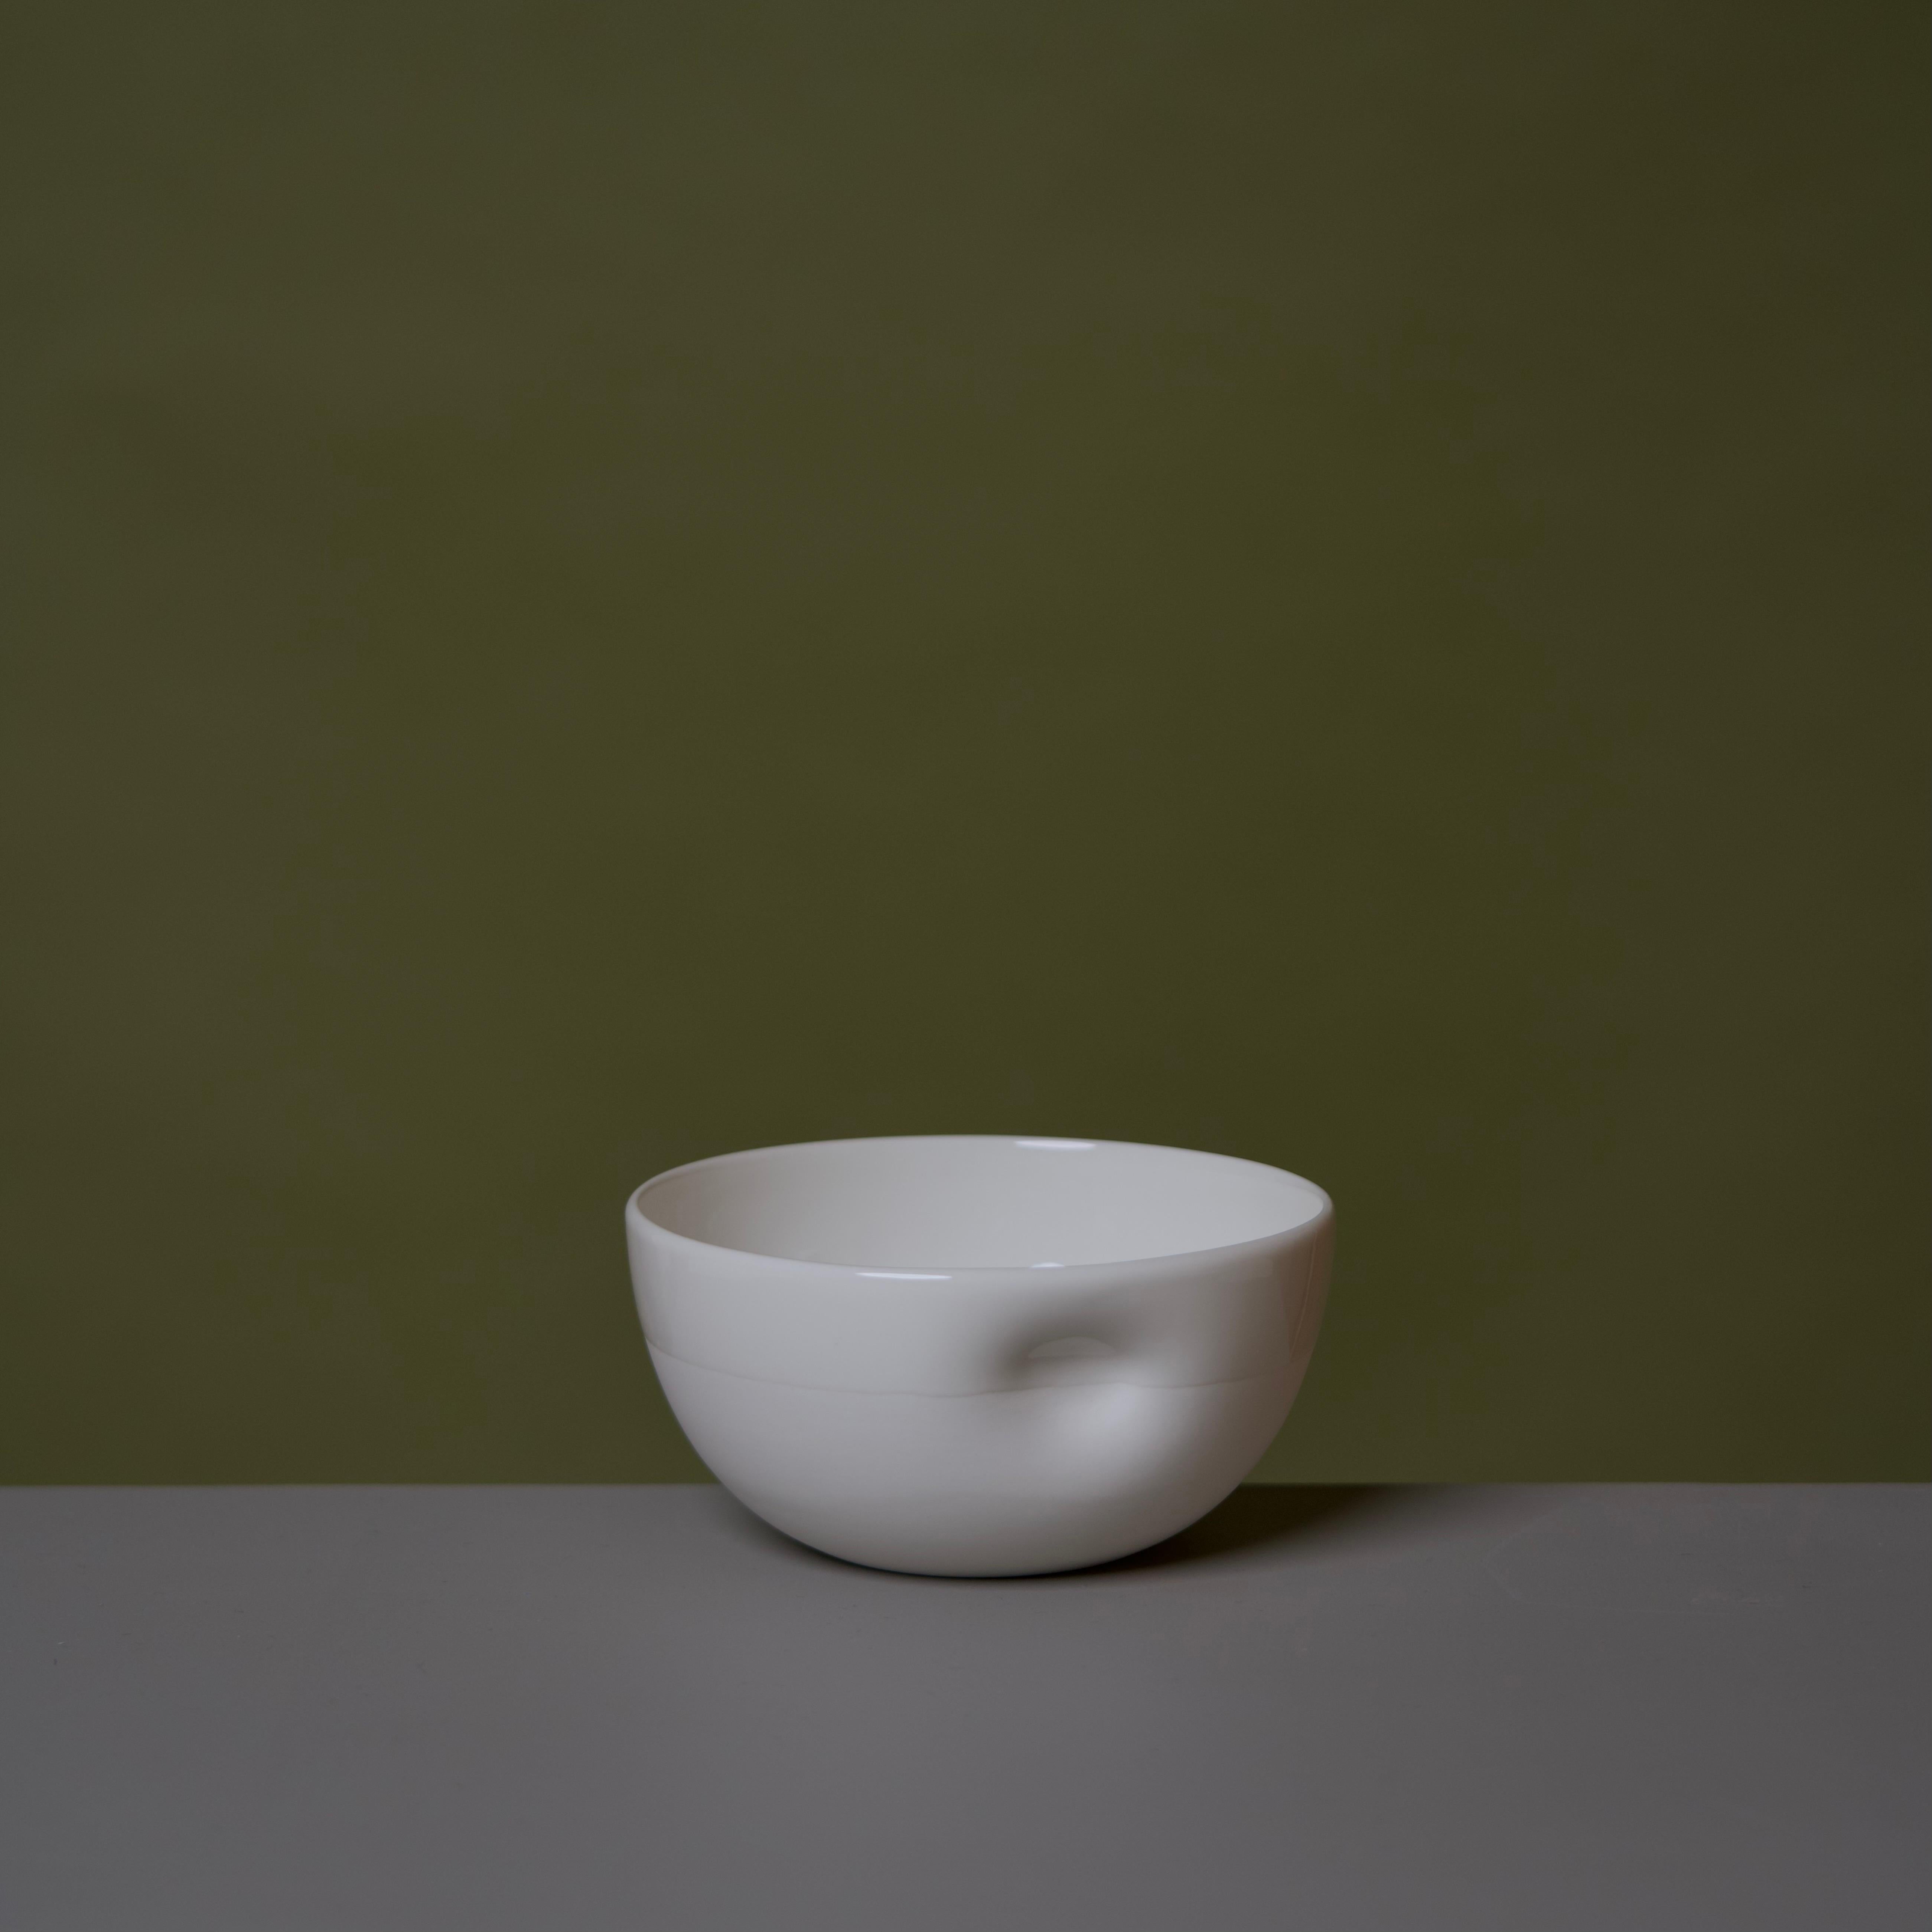 Middle Kingdom dimpled porcelain bowls are designed by Carola Zee of Rotterdam, Holland. Each bowl is molded and then dimpled by the hand of the potter to create a unique and comfortable hold. There are three sizes available, three colors, and